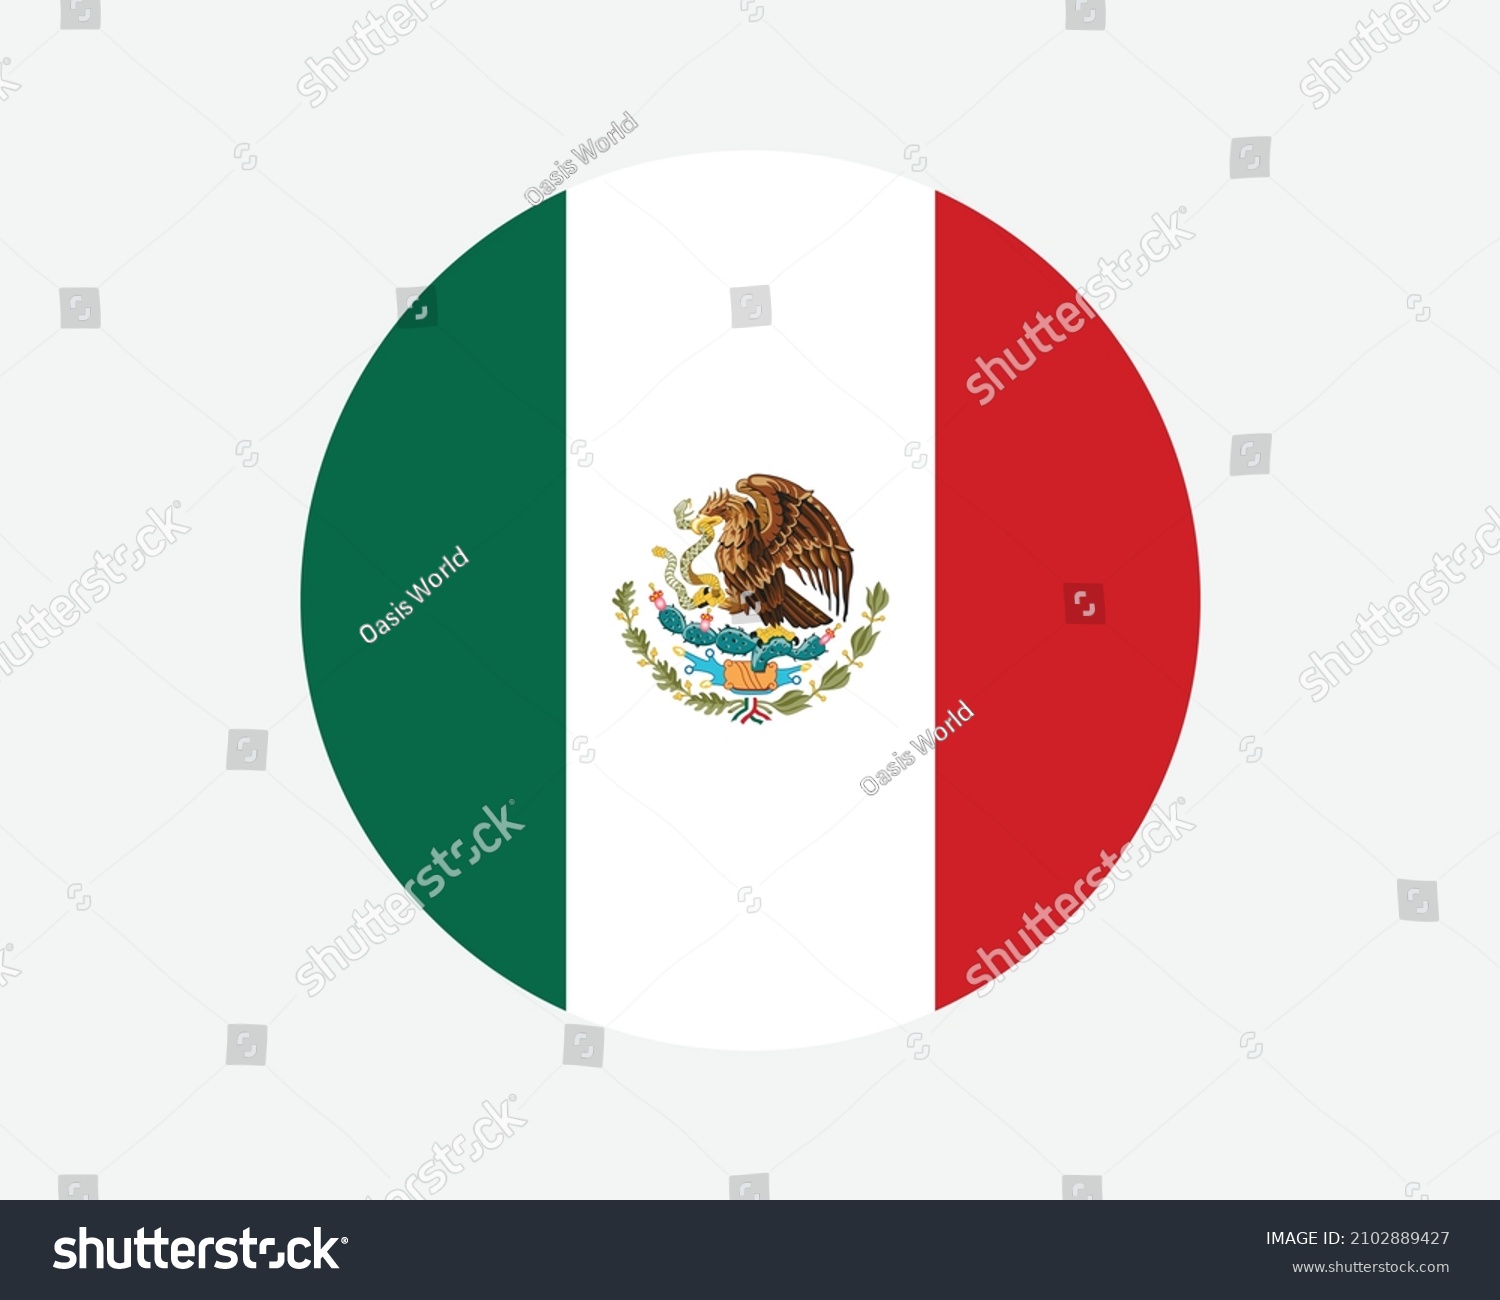 SVG of Mexico Round Country Flag. Mexican Circle National Flag. United Mexican States Circular Shape Button Banner. EPS Vector Illustration. svg